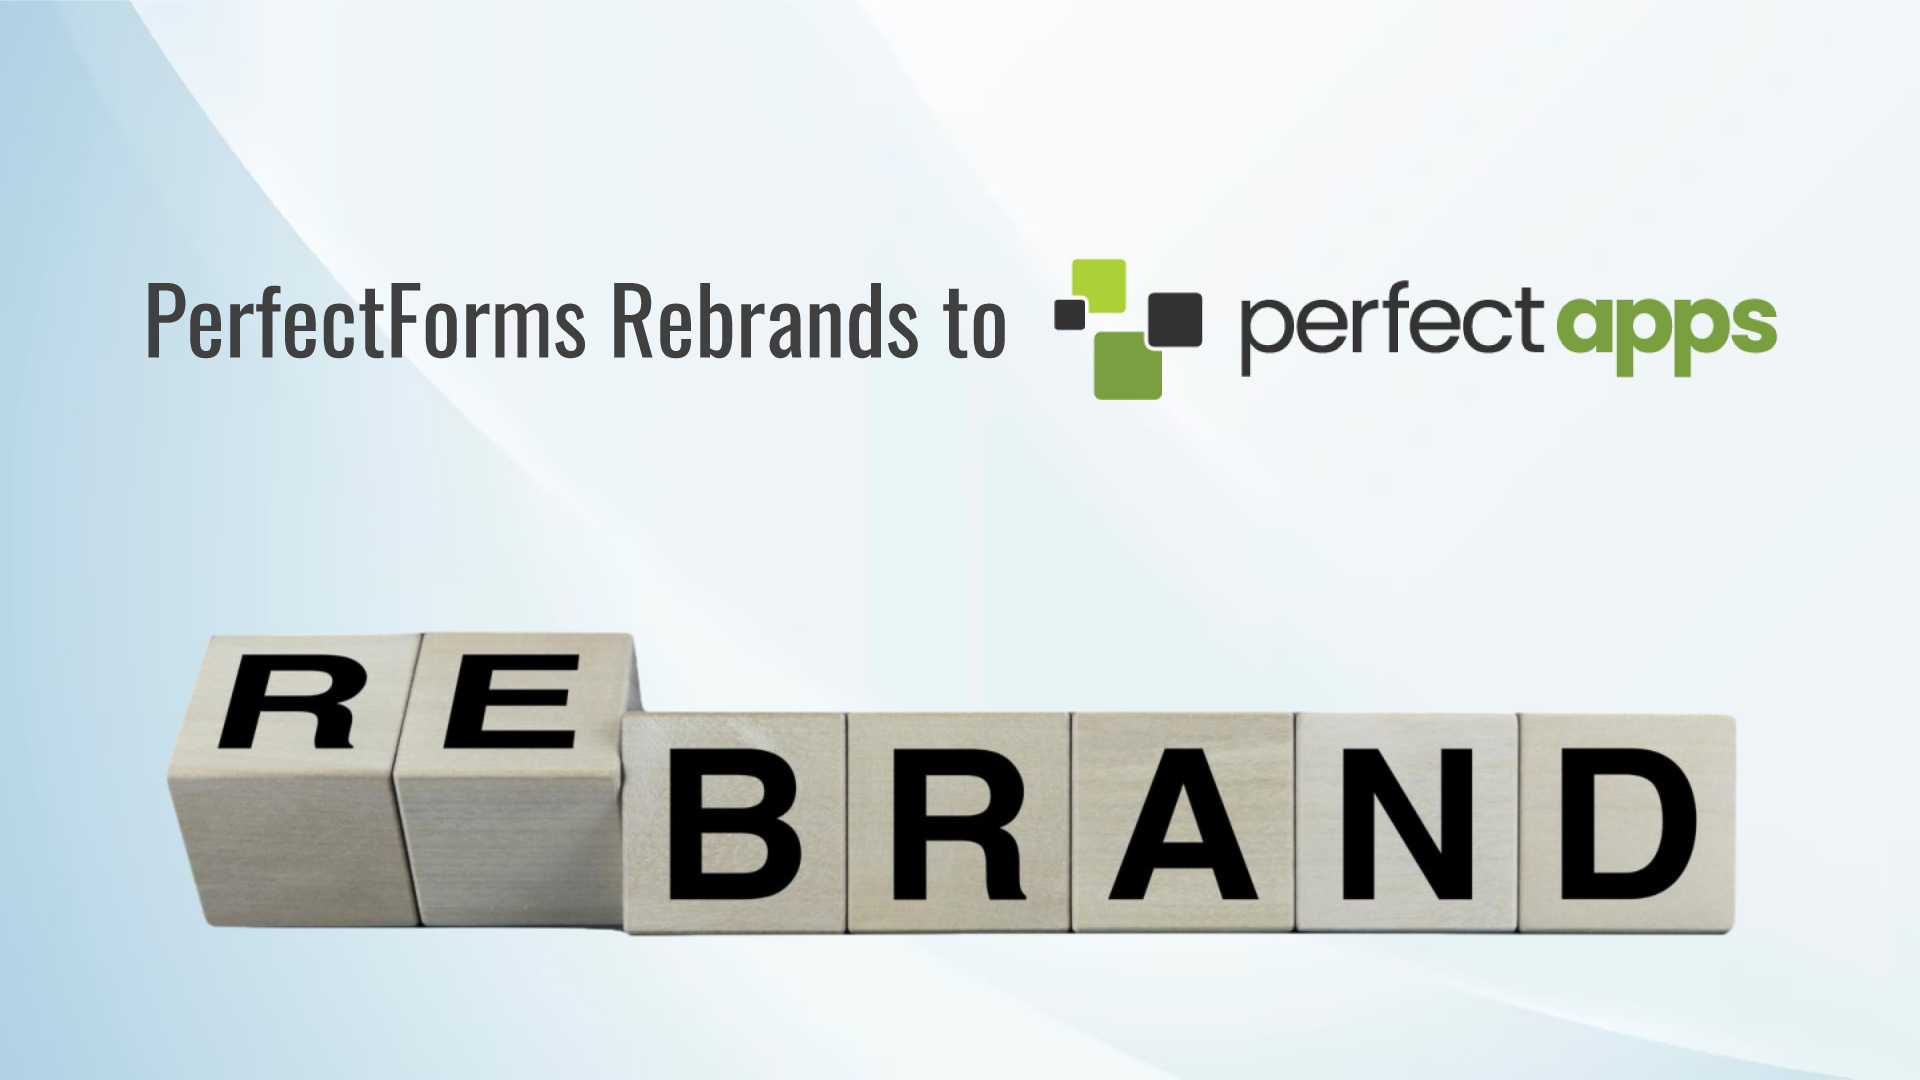 PerfectForms Announces Rebranding, Changes Name to PerfectApps